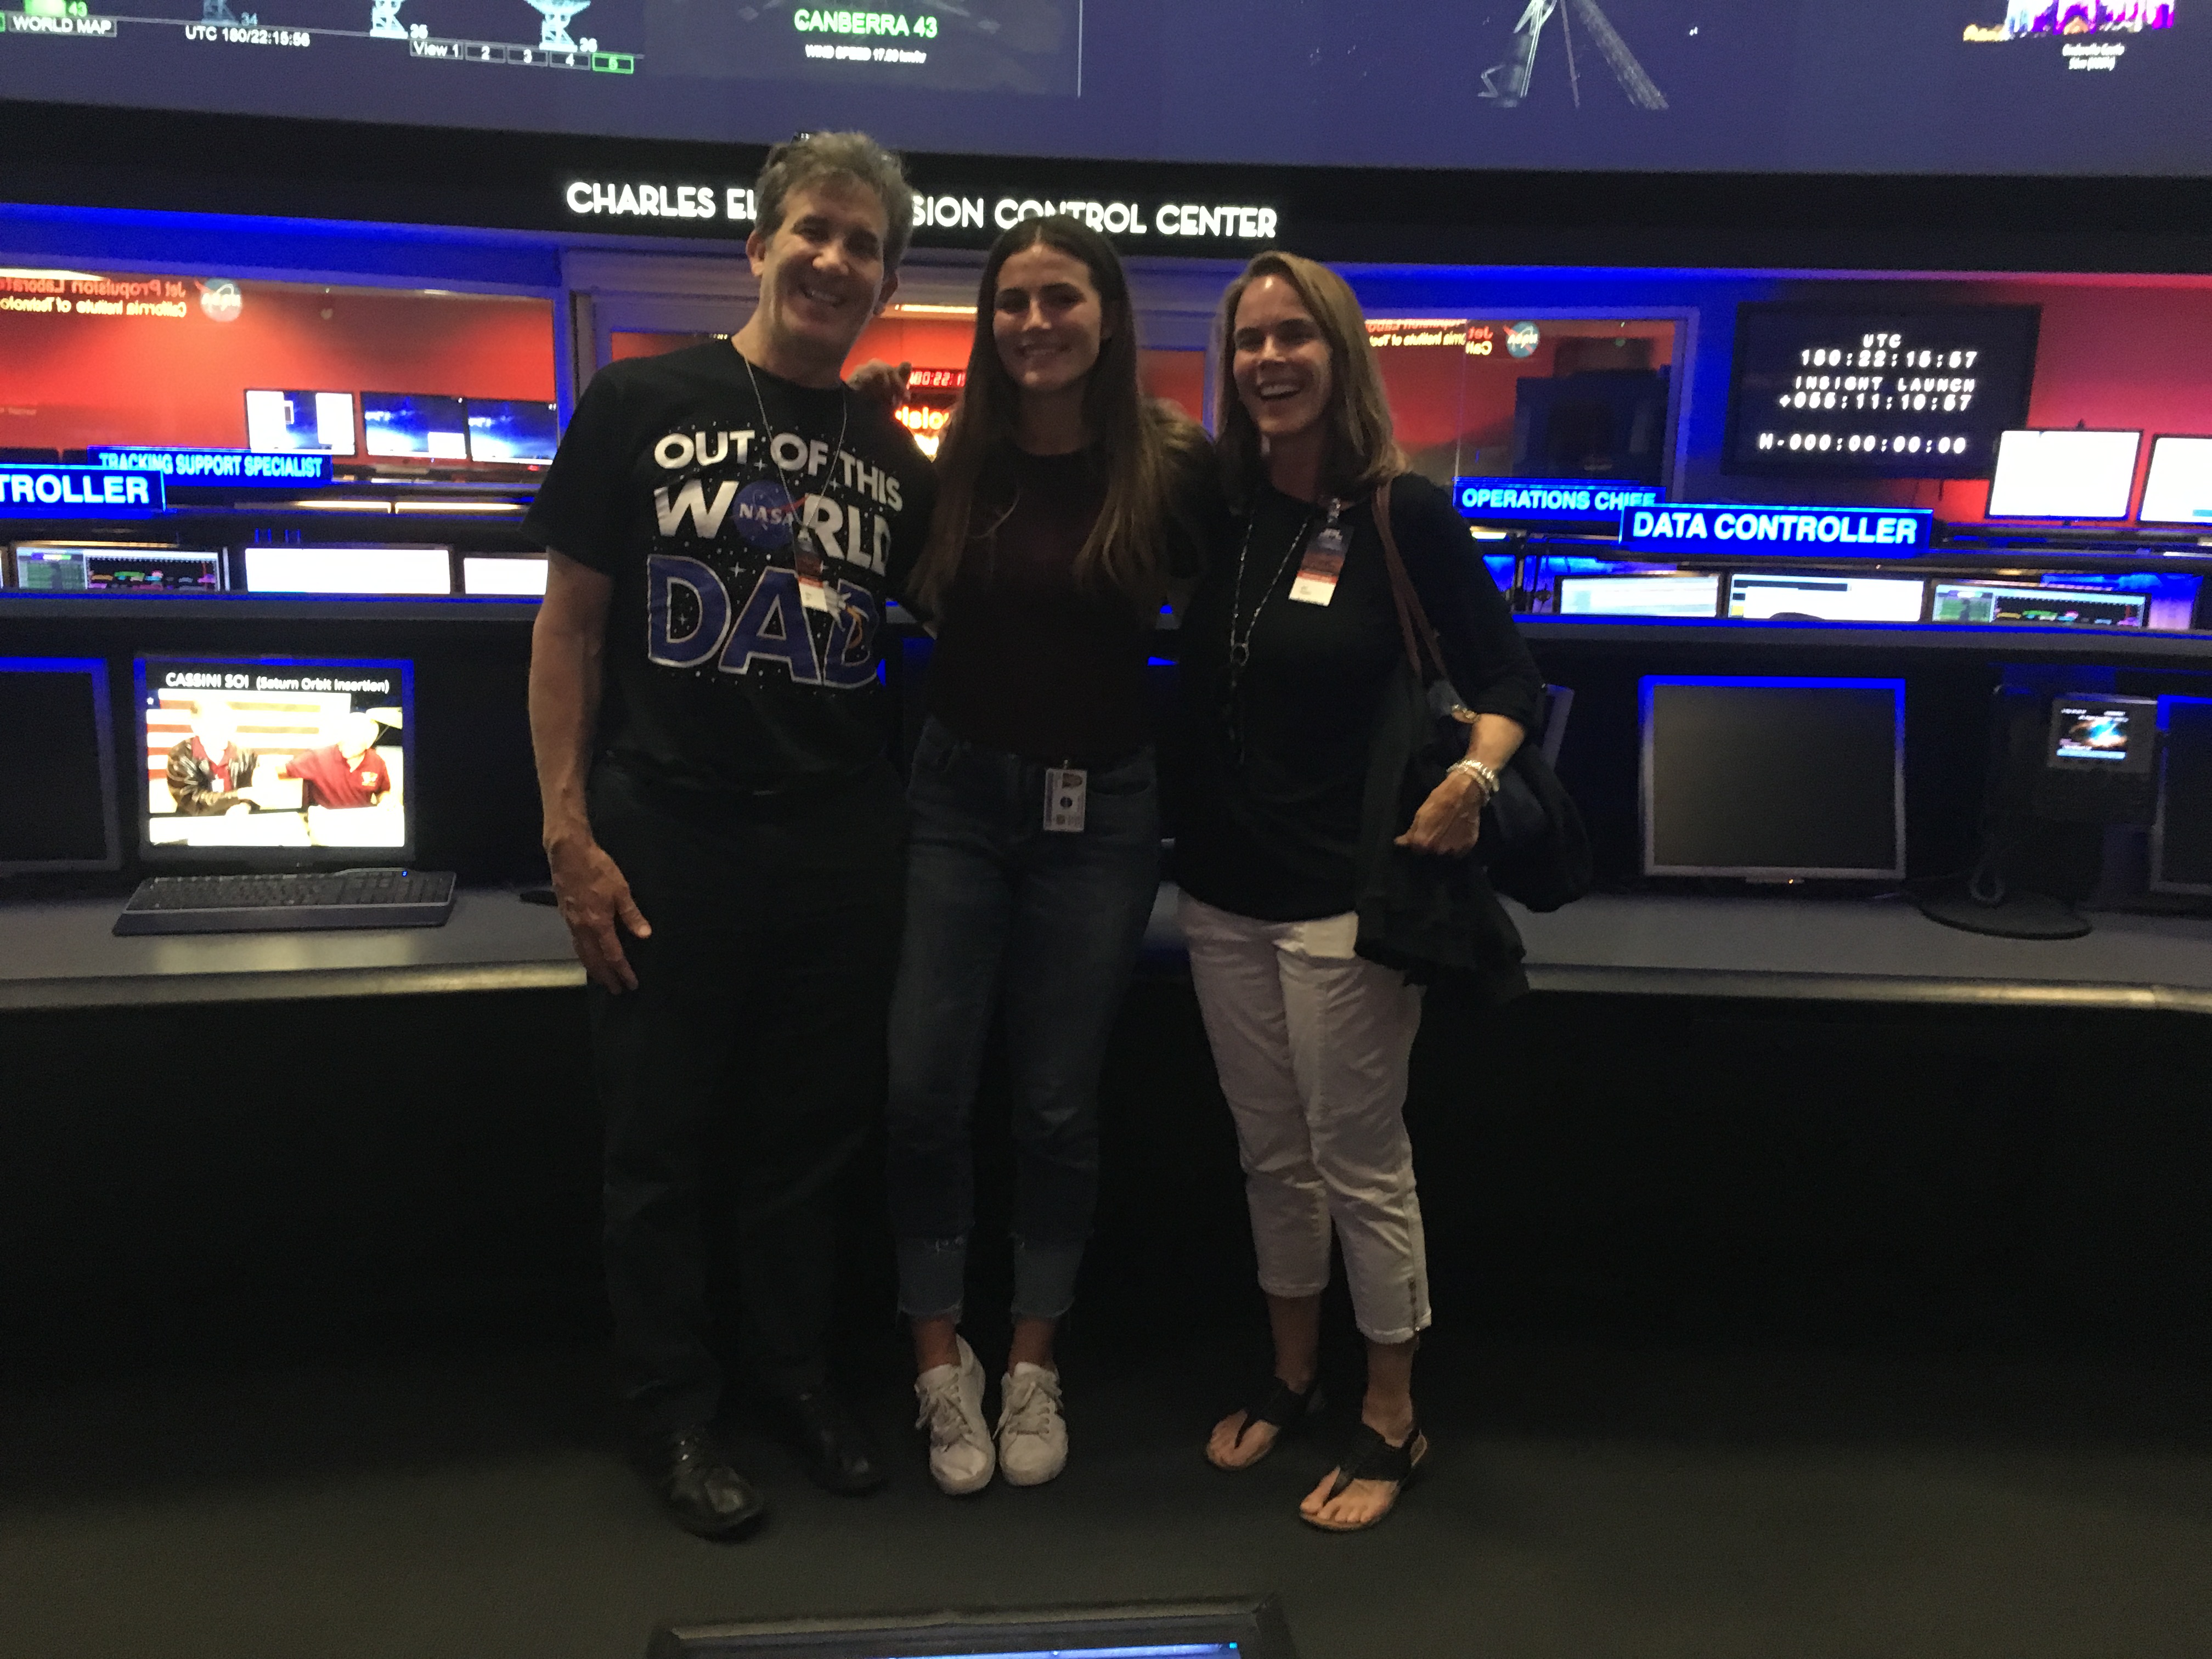 ulin posing with her parents in the control room